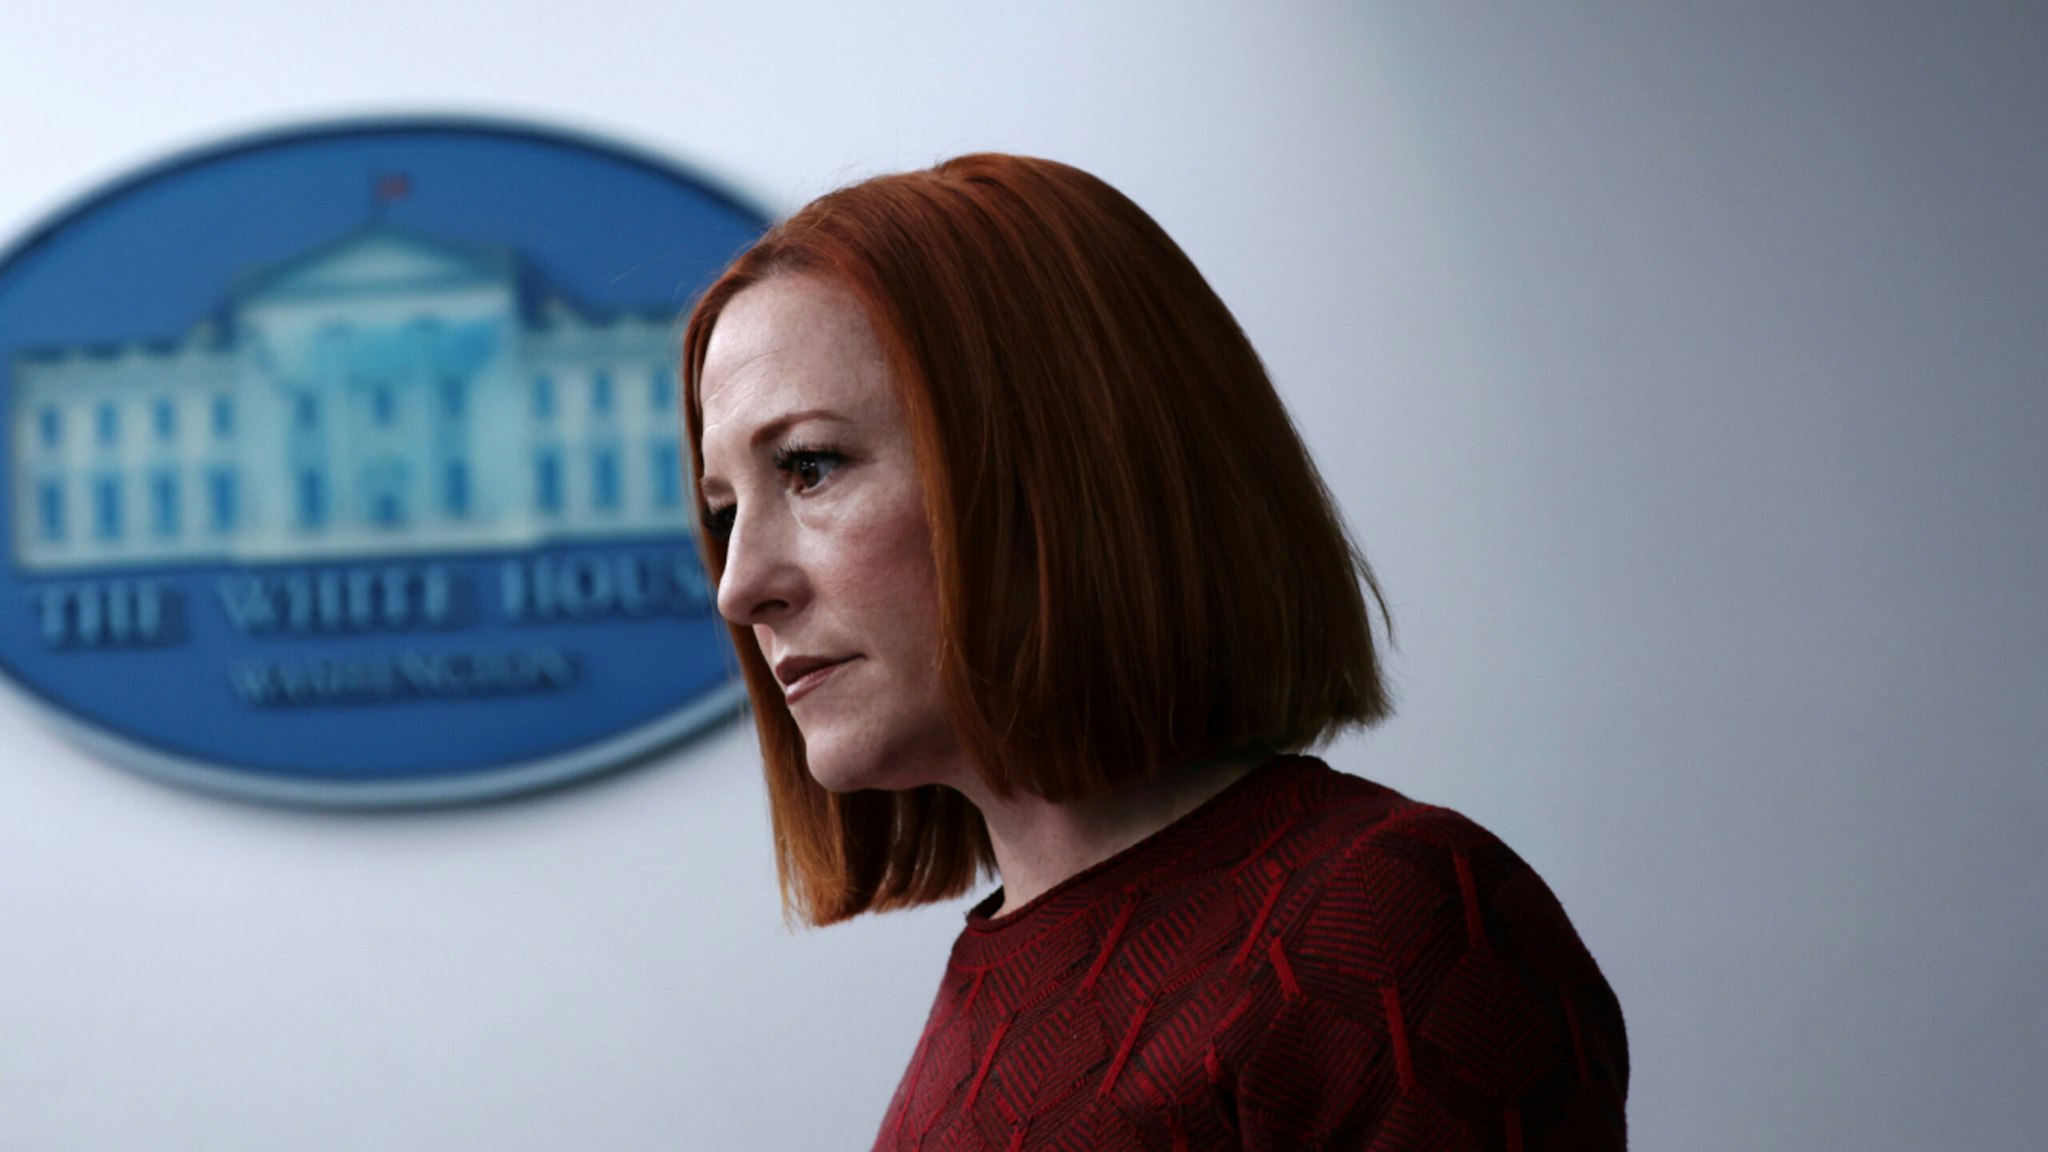 White House Press Secretary Jen Psaki speaks during a daily press briefing at the James S. Brady Press Briefing Room of the White House February 15, 2022 in Washington, DC.